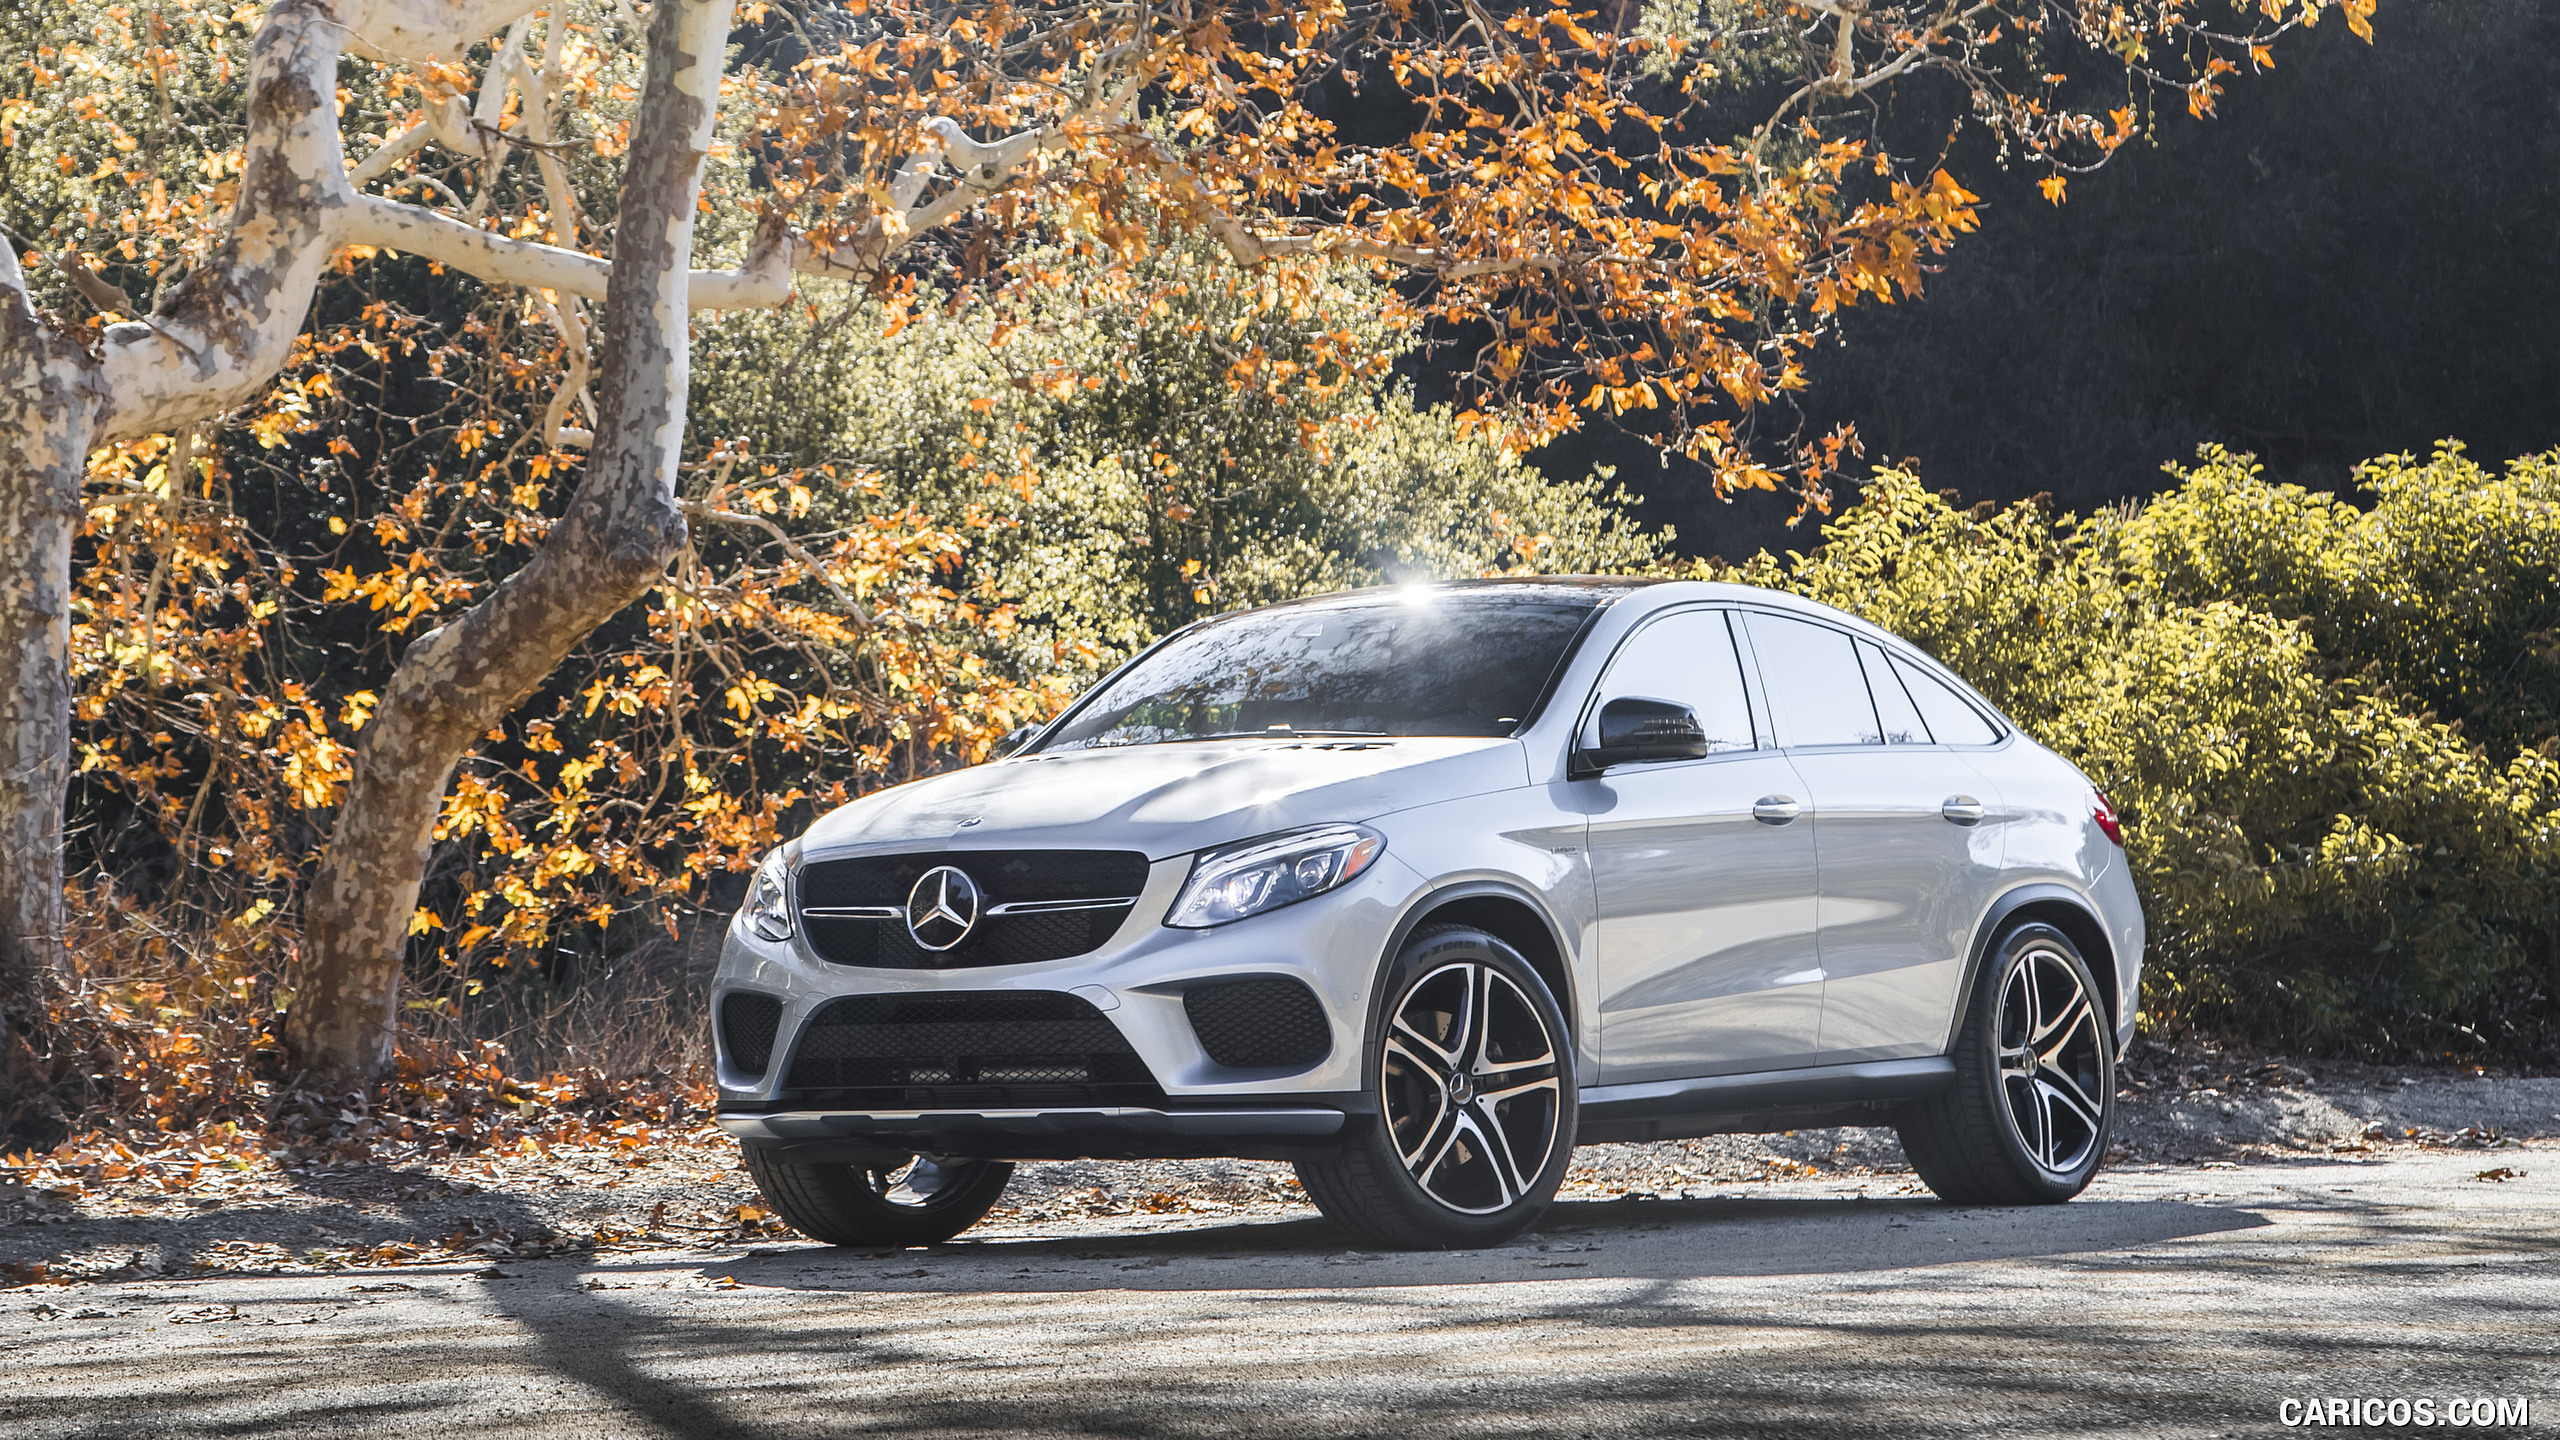 2017 Mercedes-AMG GLE 43 Coupe (US-Spec) - Front Three-Quarter, #11 of 29